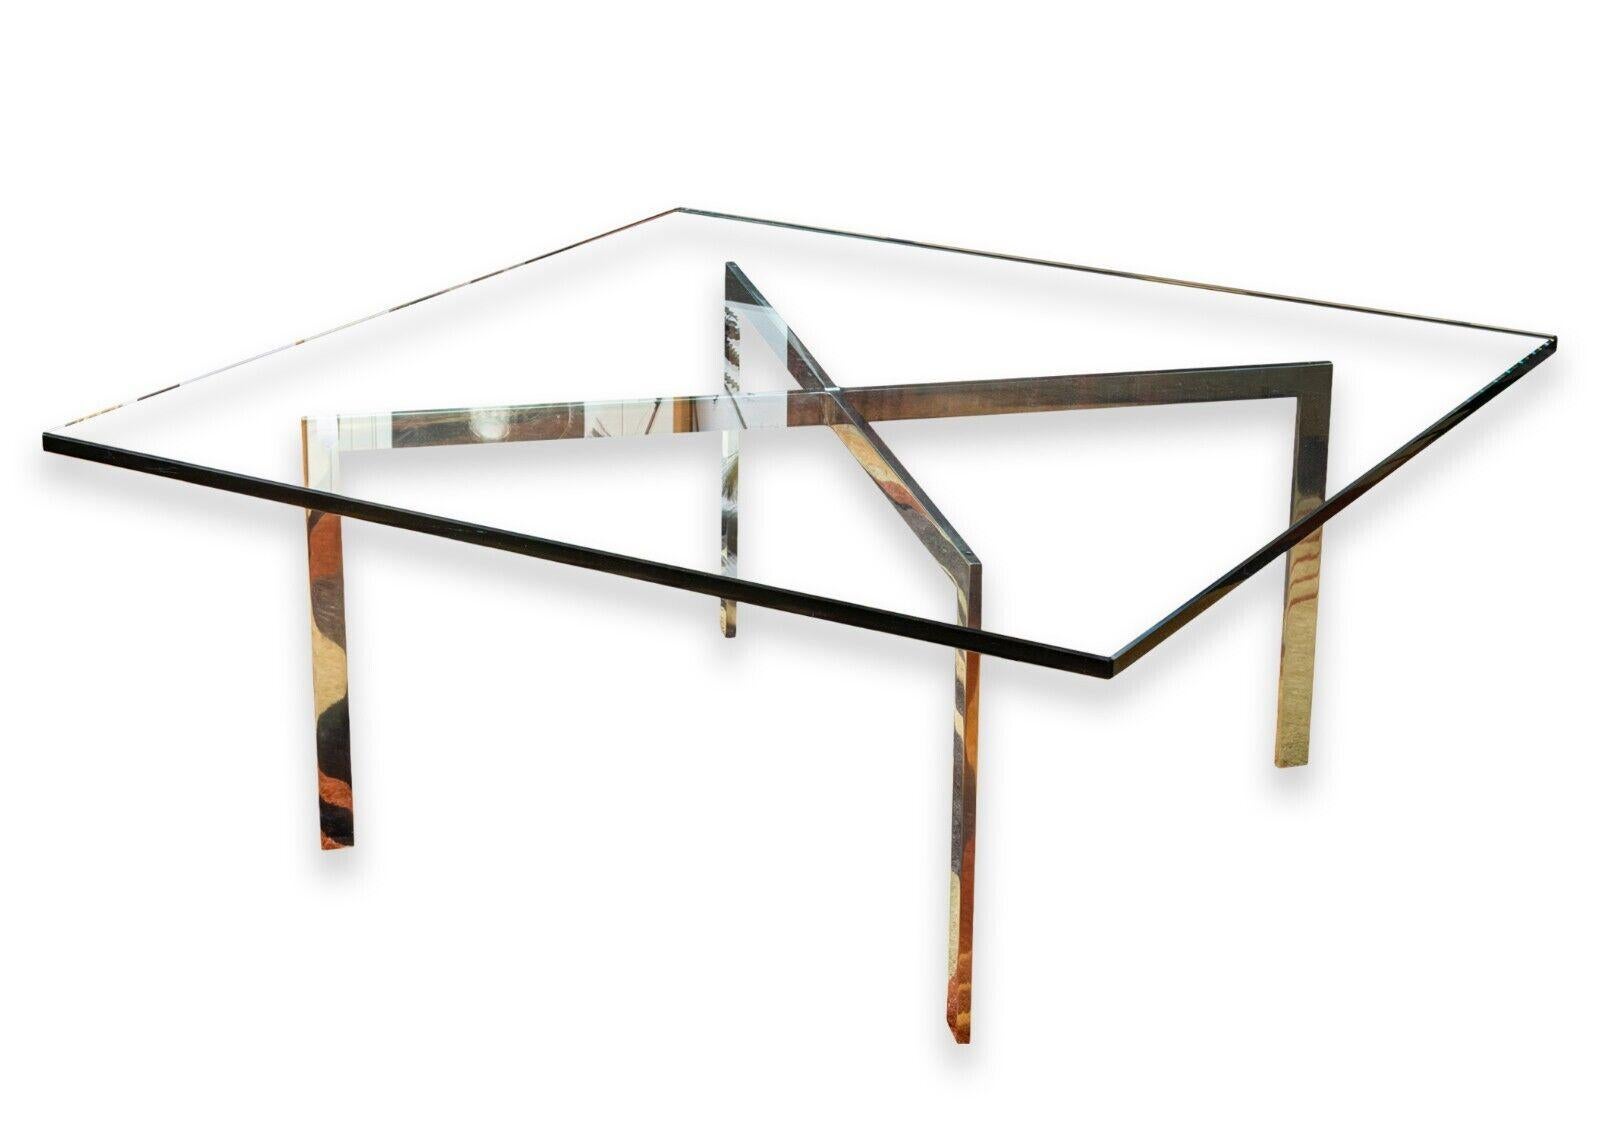 A Mies van der Rohe for Knoll Barcelona coffee table. An extremely iconic coffee table for your extremely iconic home. A piece of functional artwork, simple yet sculptural. This modern coffee table features a thick square glass table top, and chrome